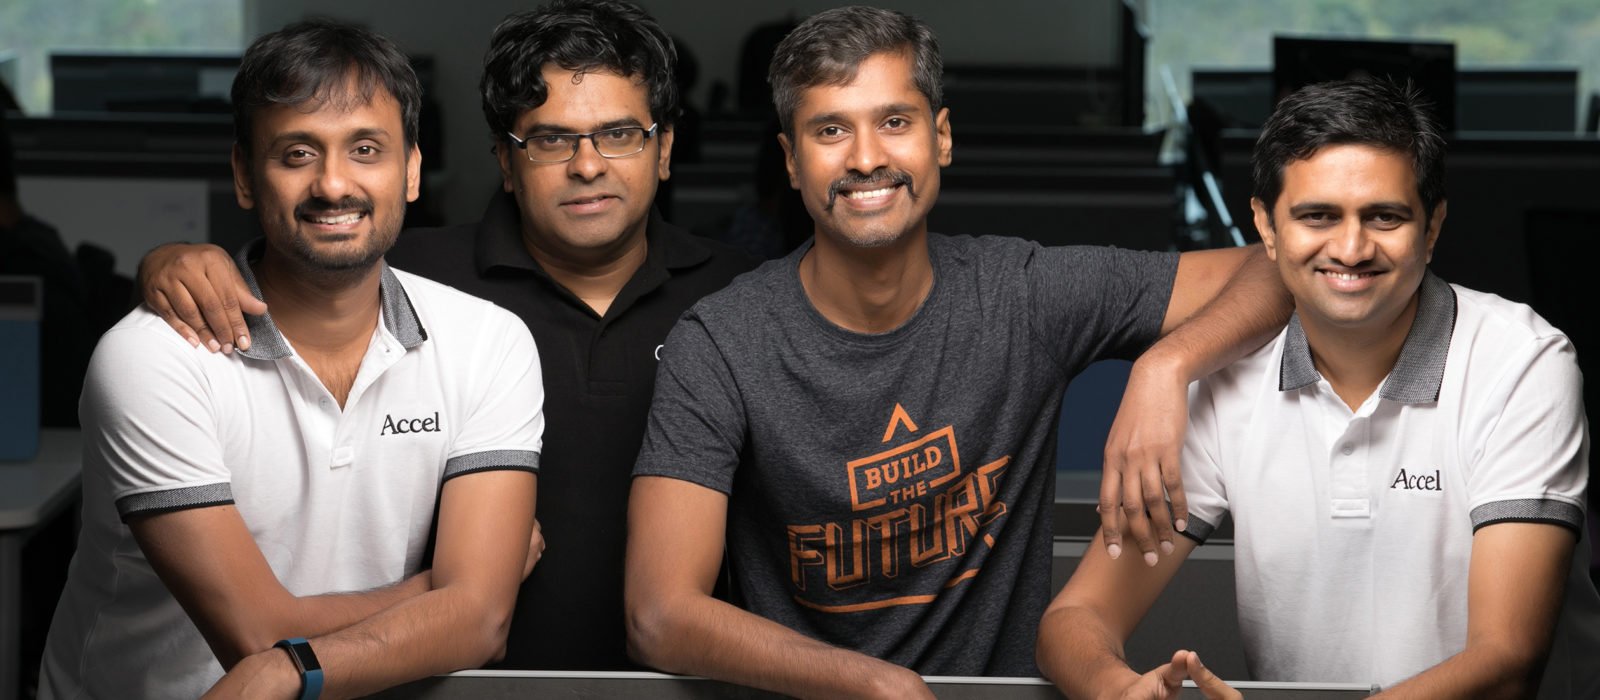 Welcome to Europe: Chennai-based Chargebee chooses Amsterdam for European expansion (interview)